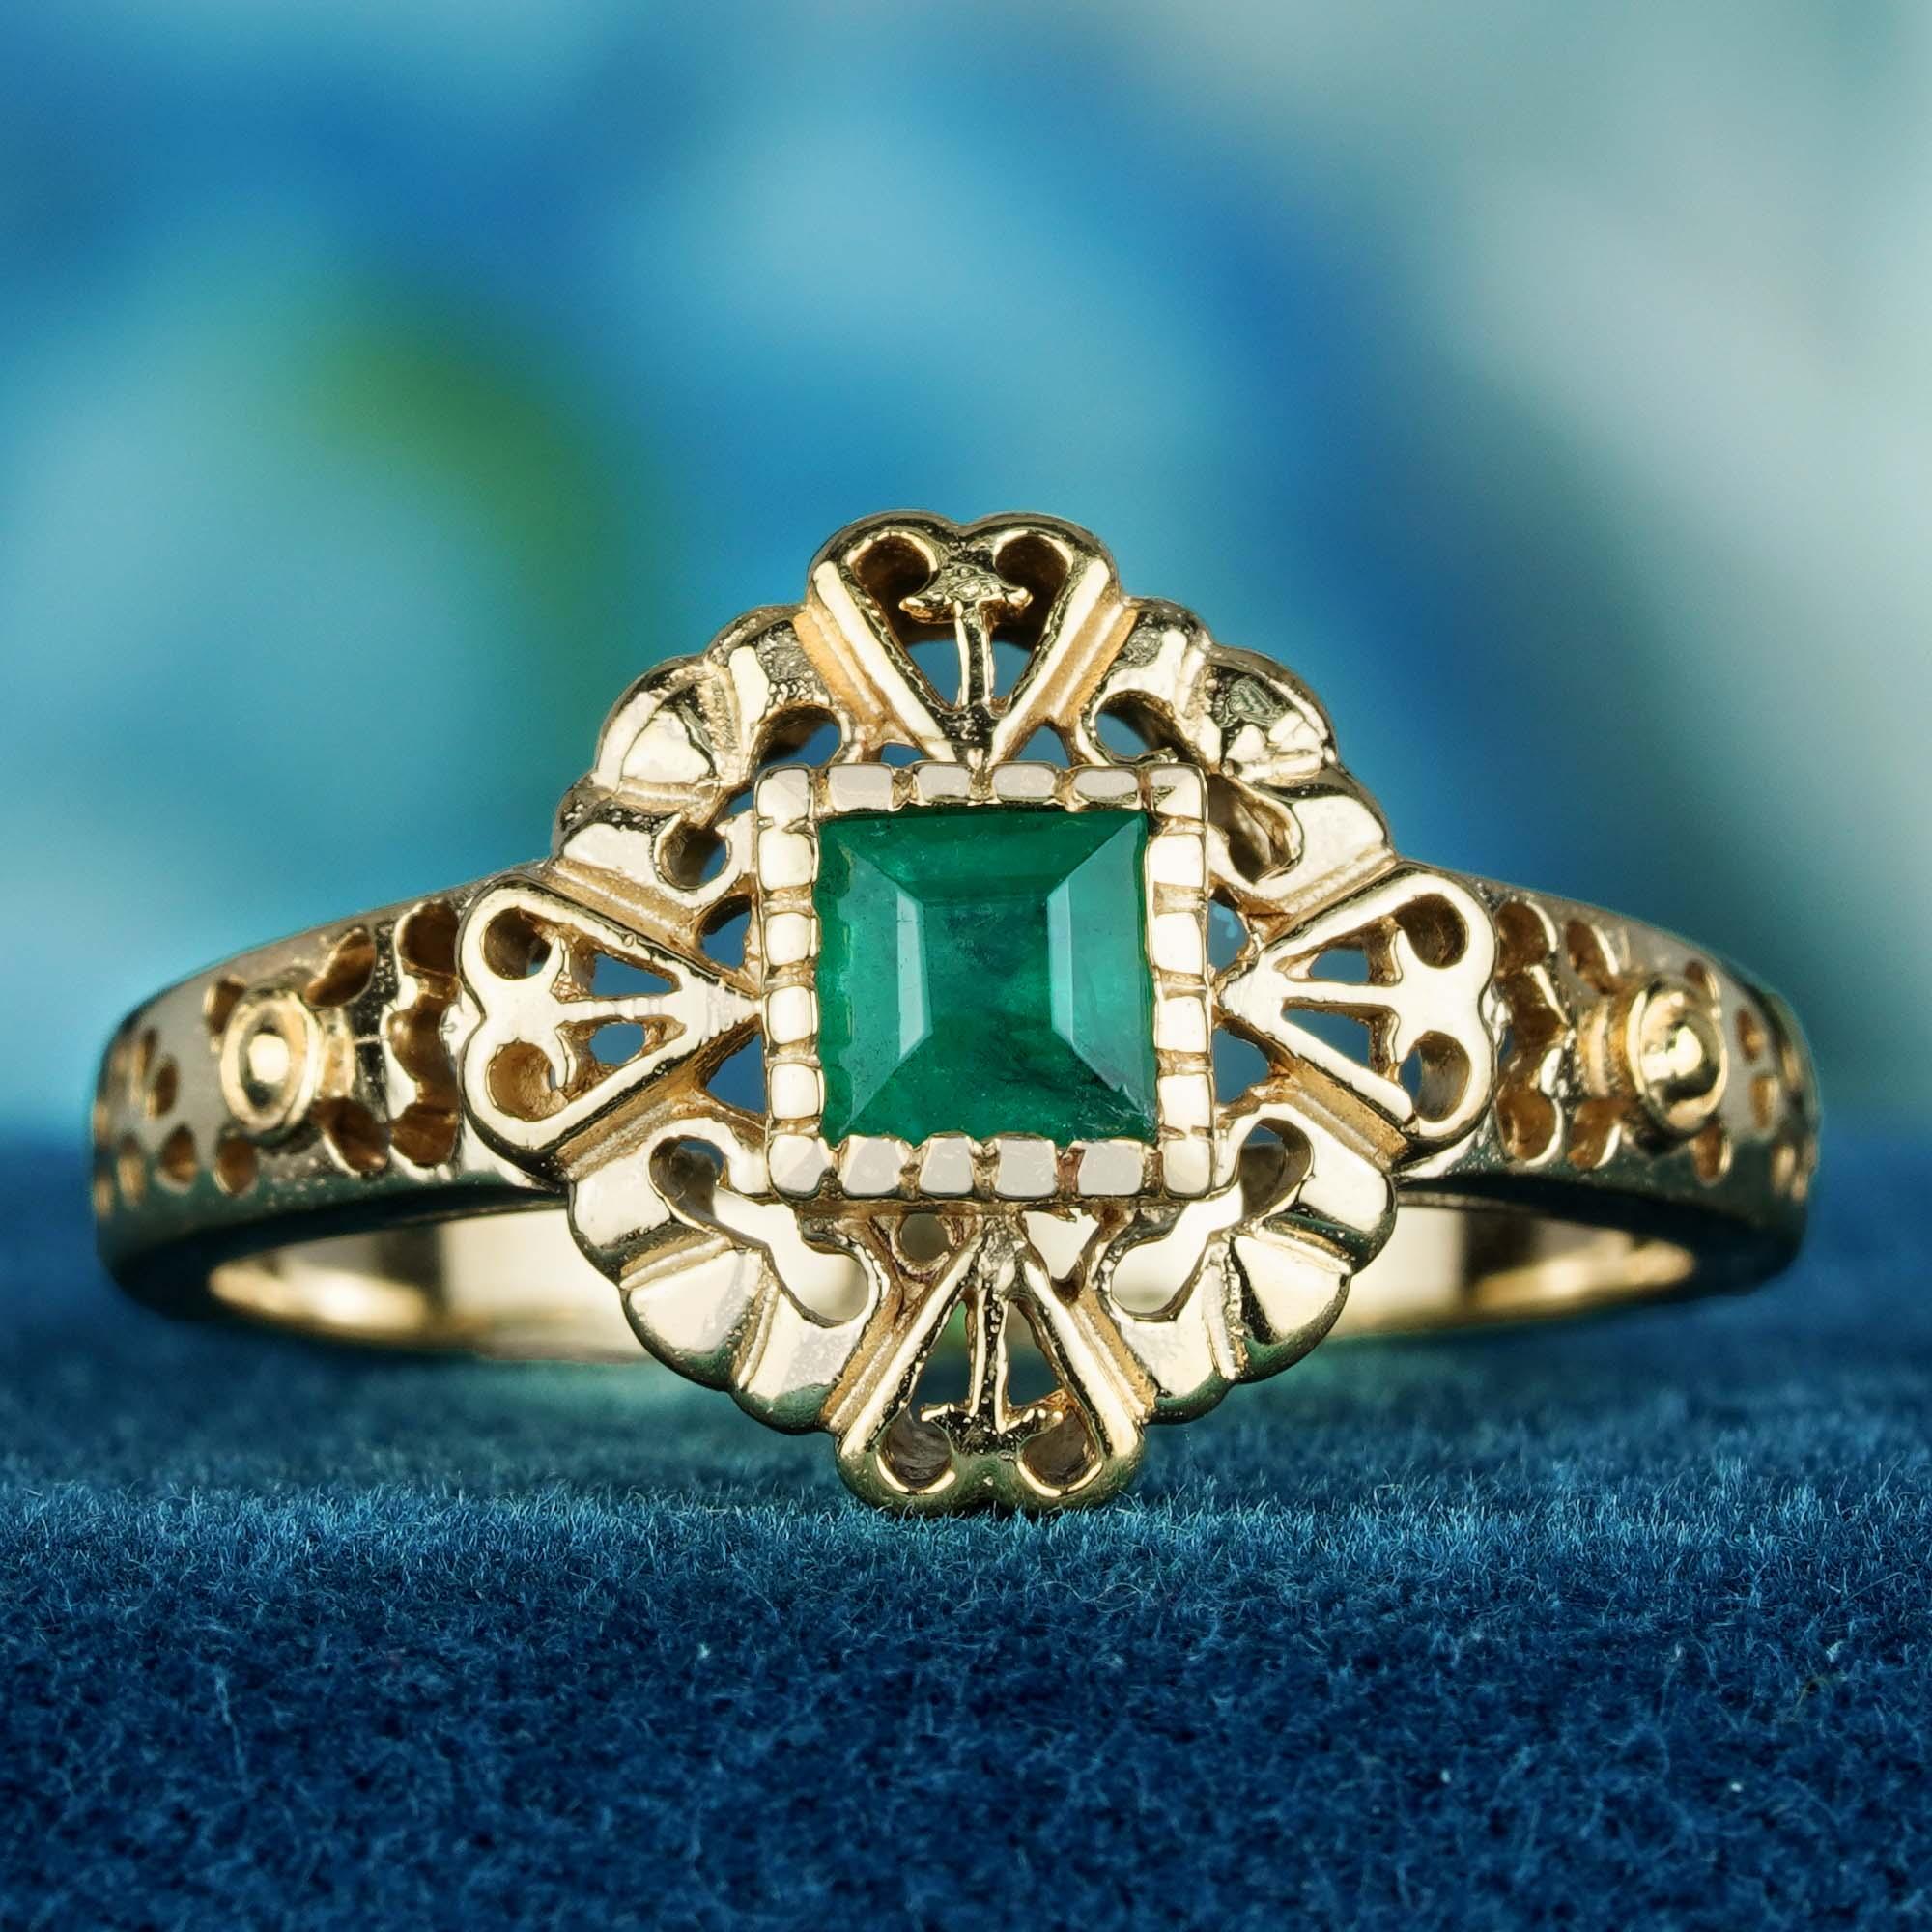 For Sale:  Natural Square Emerald Vintage Style Solitaire Heart Filigree Ring in 9K Gold 2